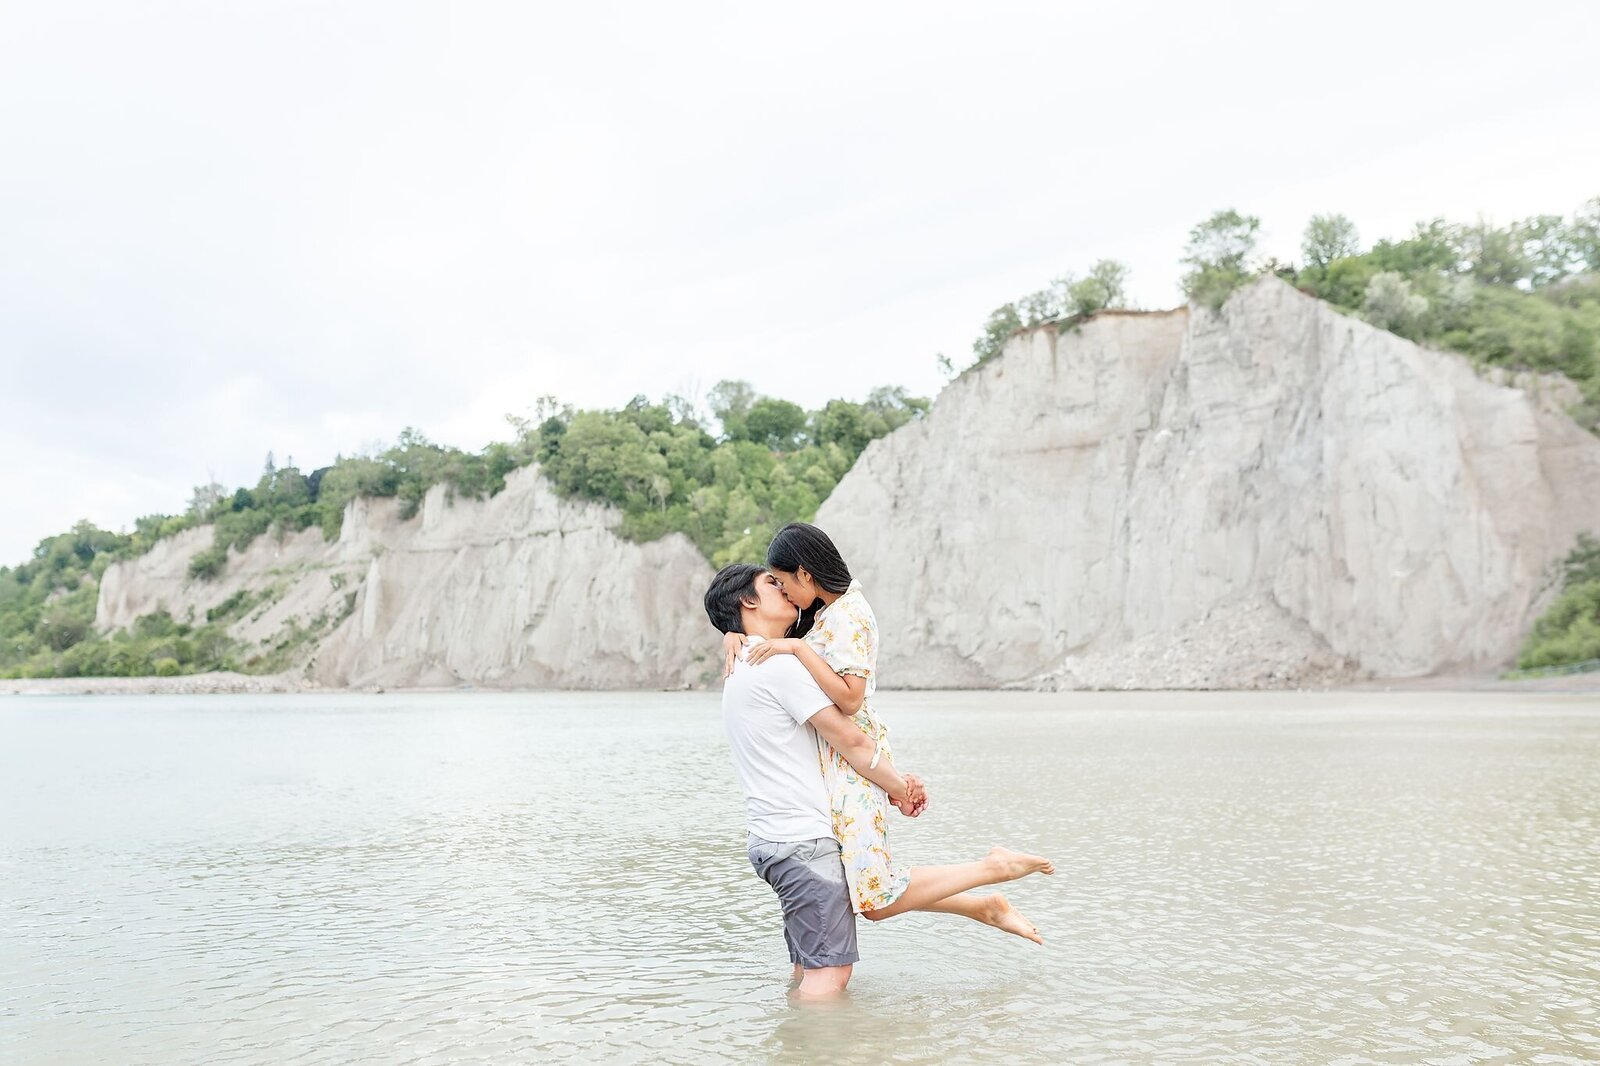 Guy-lifts-his-fiance-up-in-the-water-at-the-beach-during-their-engagement-session-in-hamilton-ontario